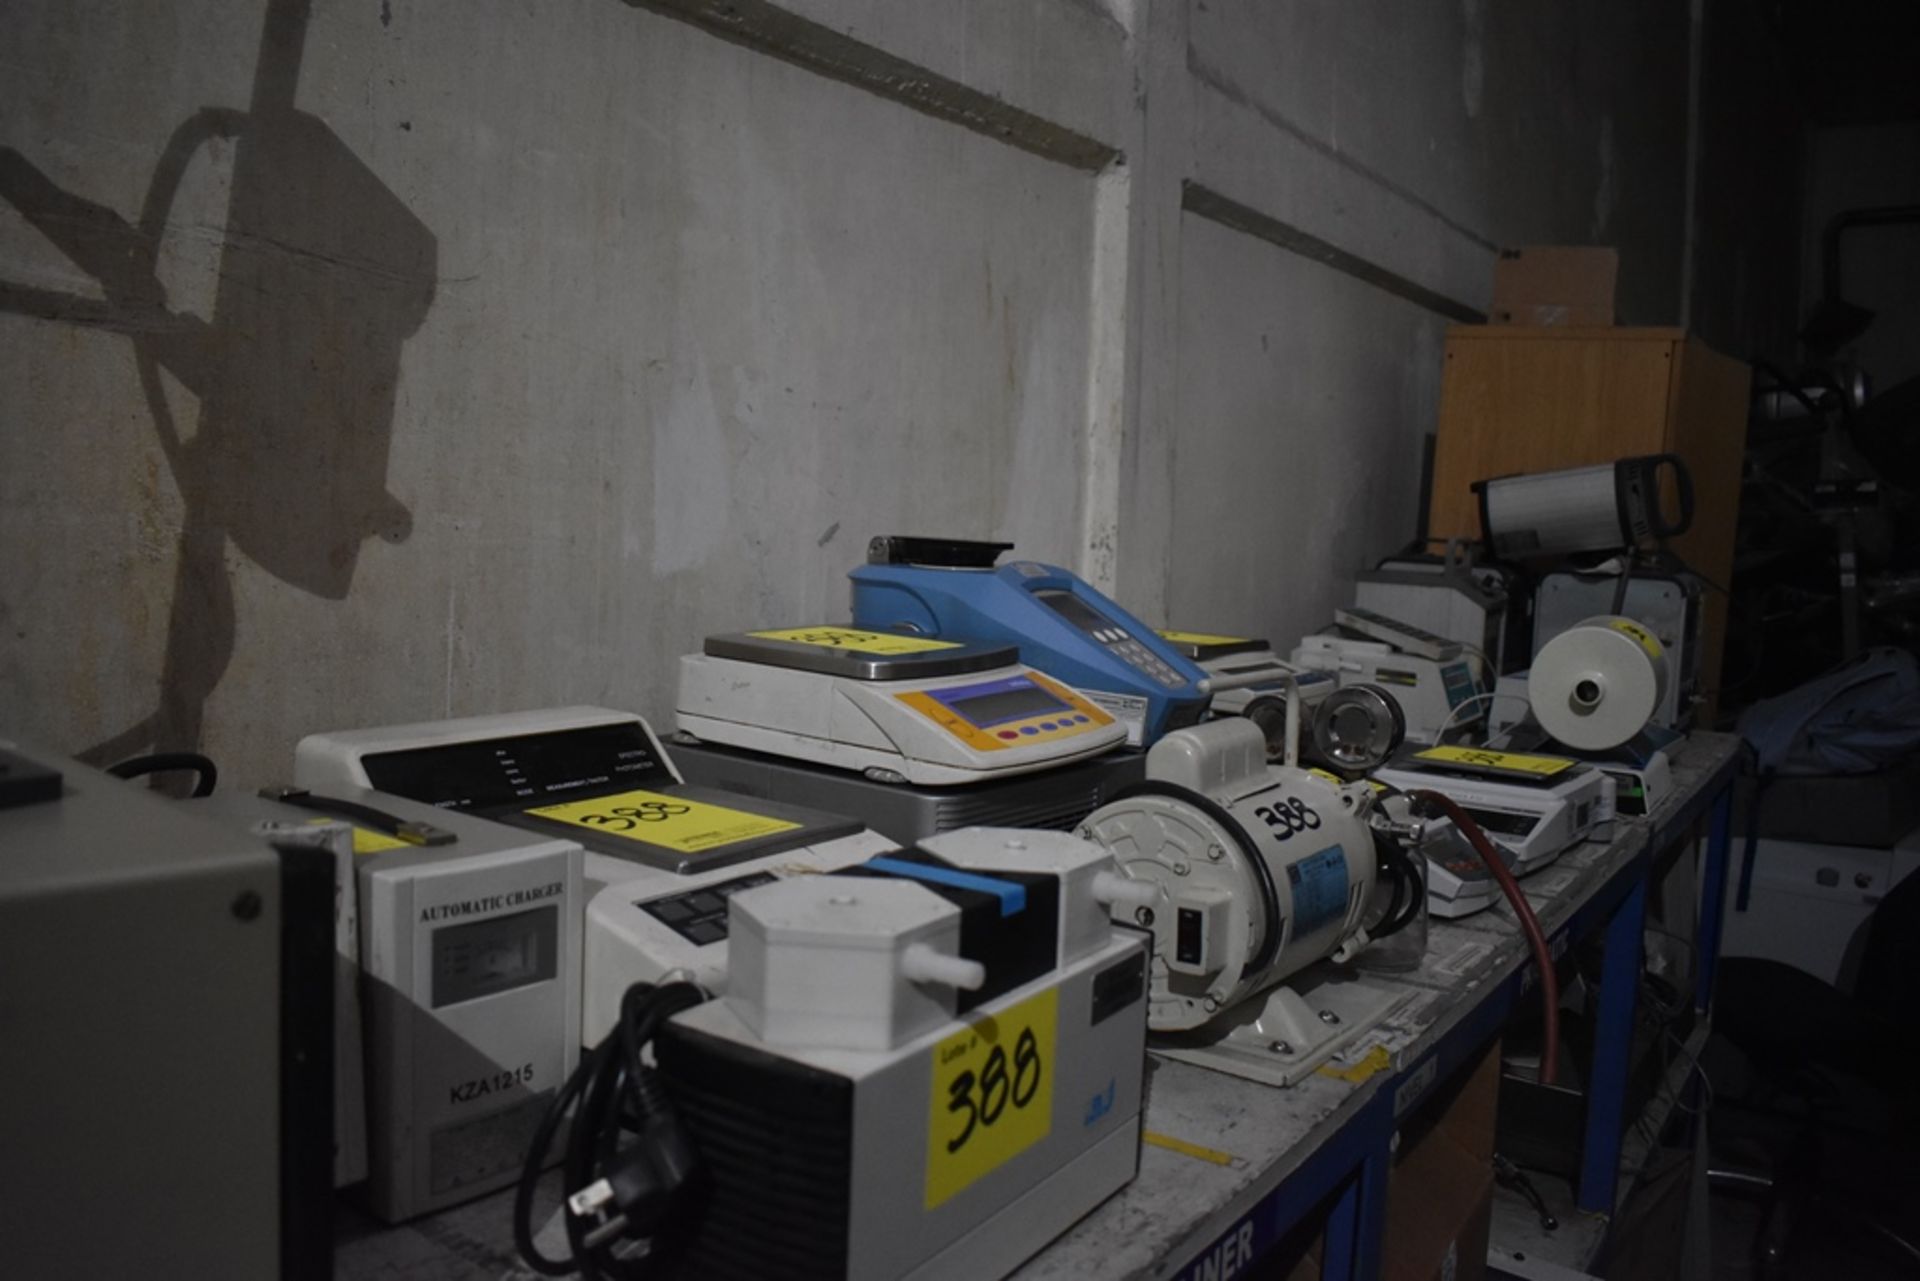 5 Oxygen analyzers and miscellaneous merchandise - Image 10 of 52